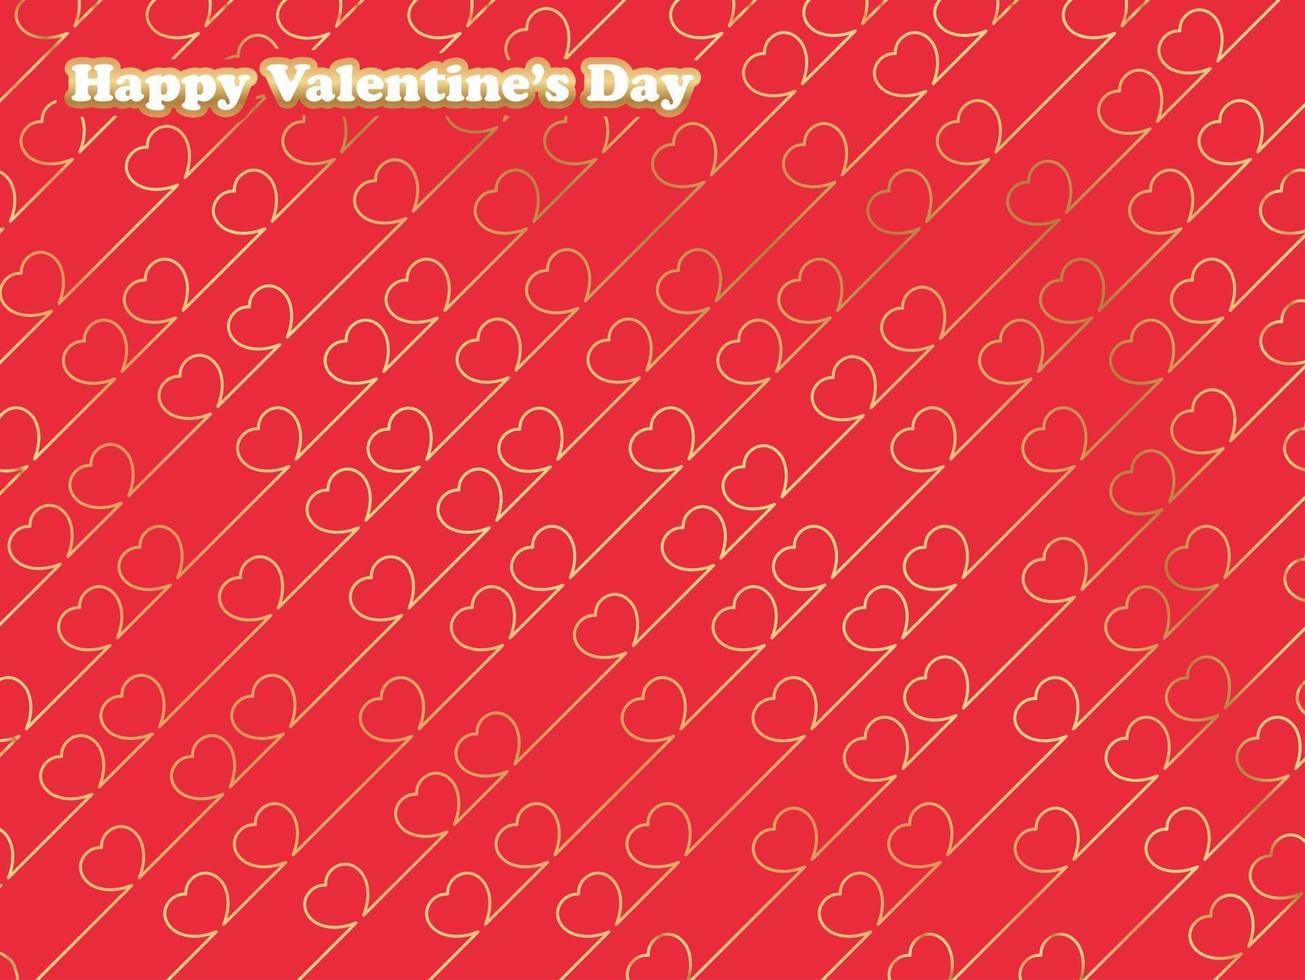 Valentines Day Vector Background With A Shiny Gold Heart Pattern On A Red Background